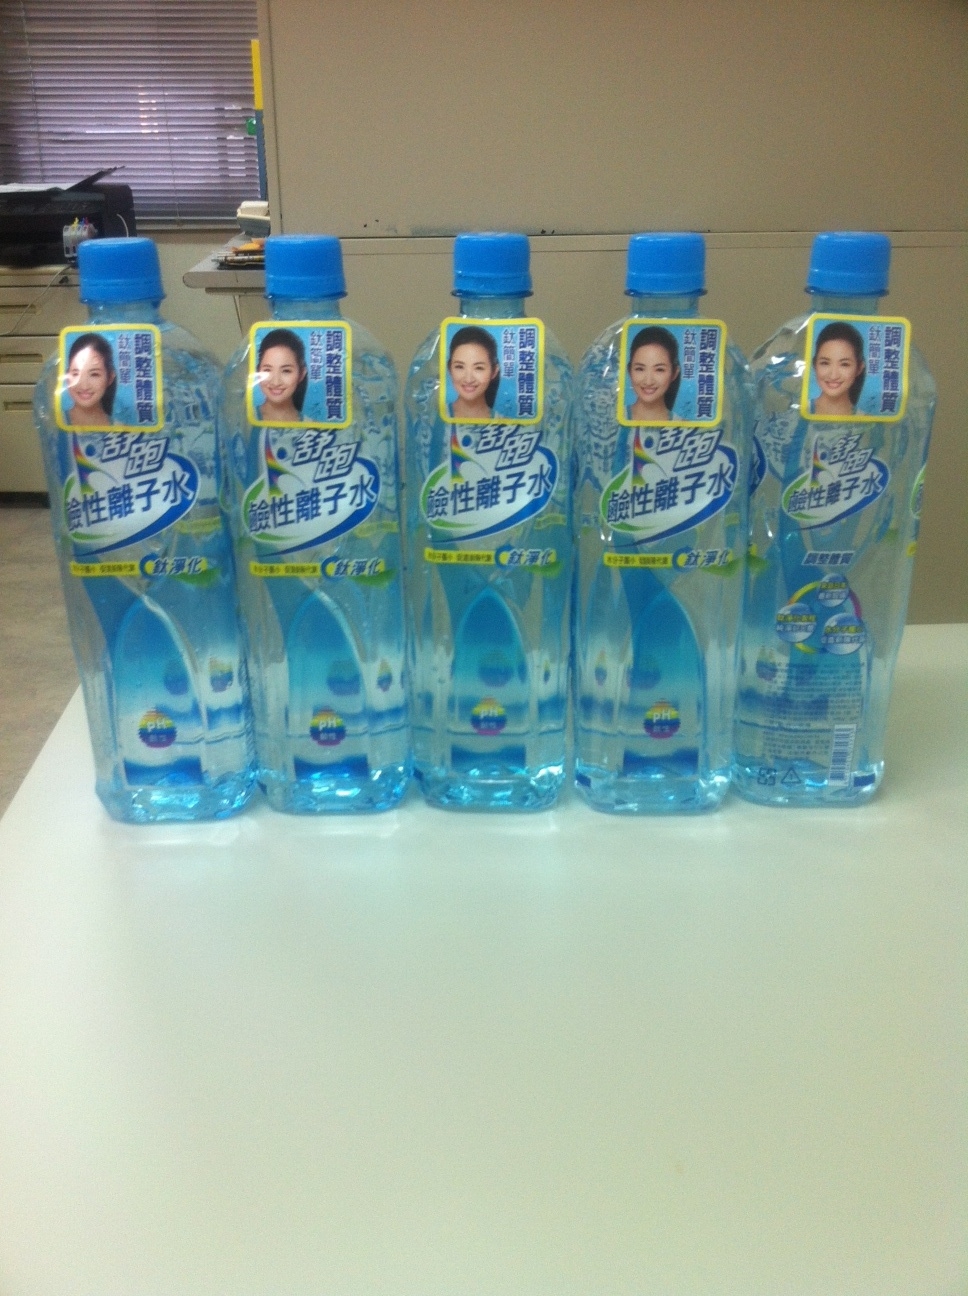 Here is the bottled alkaline ion water productions from one of biggest beverage company in Taiwan